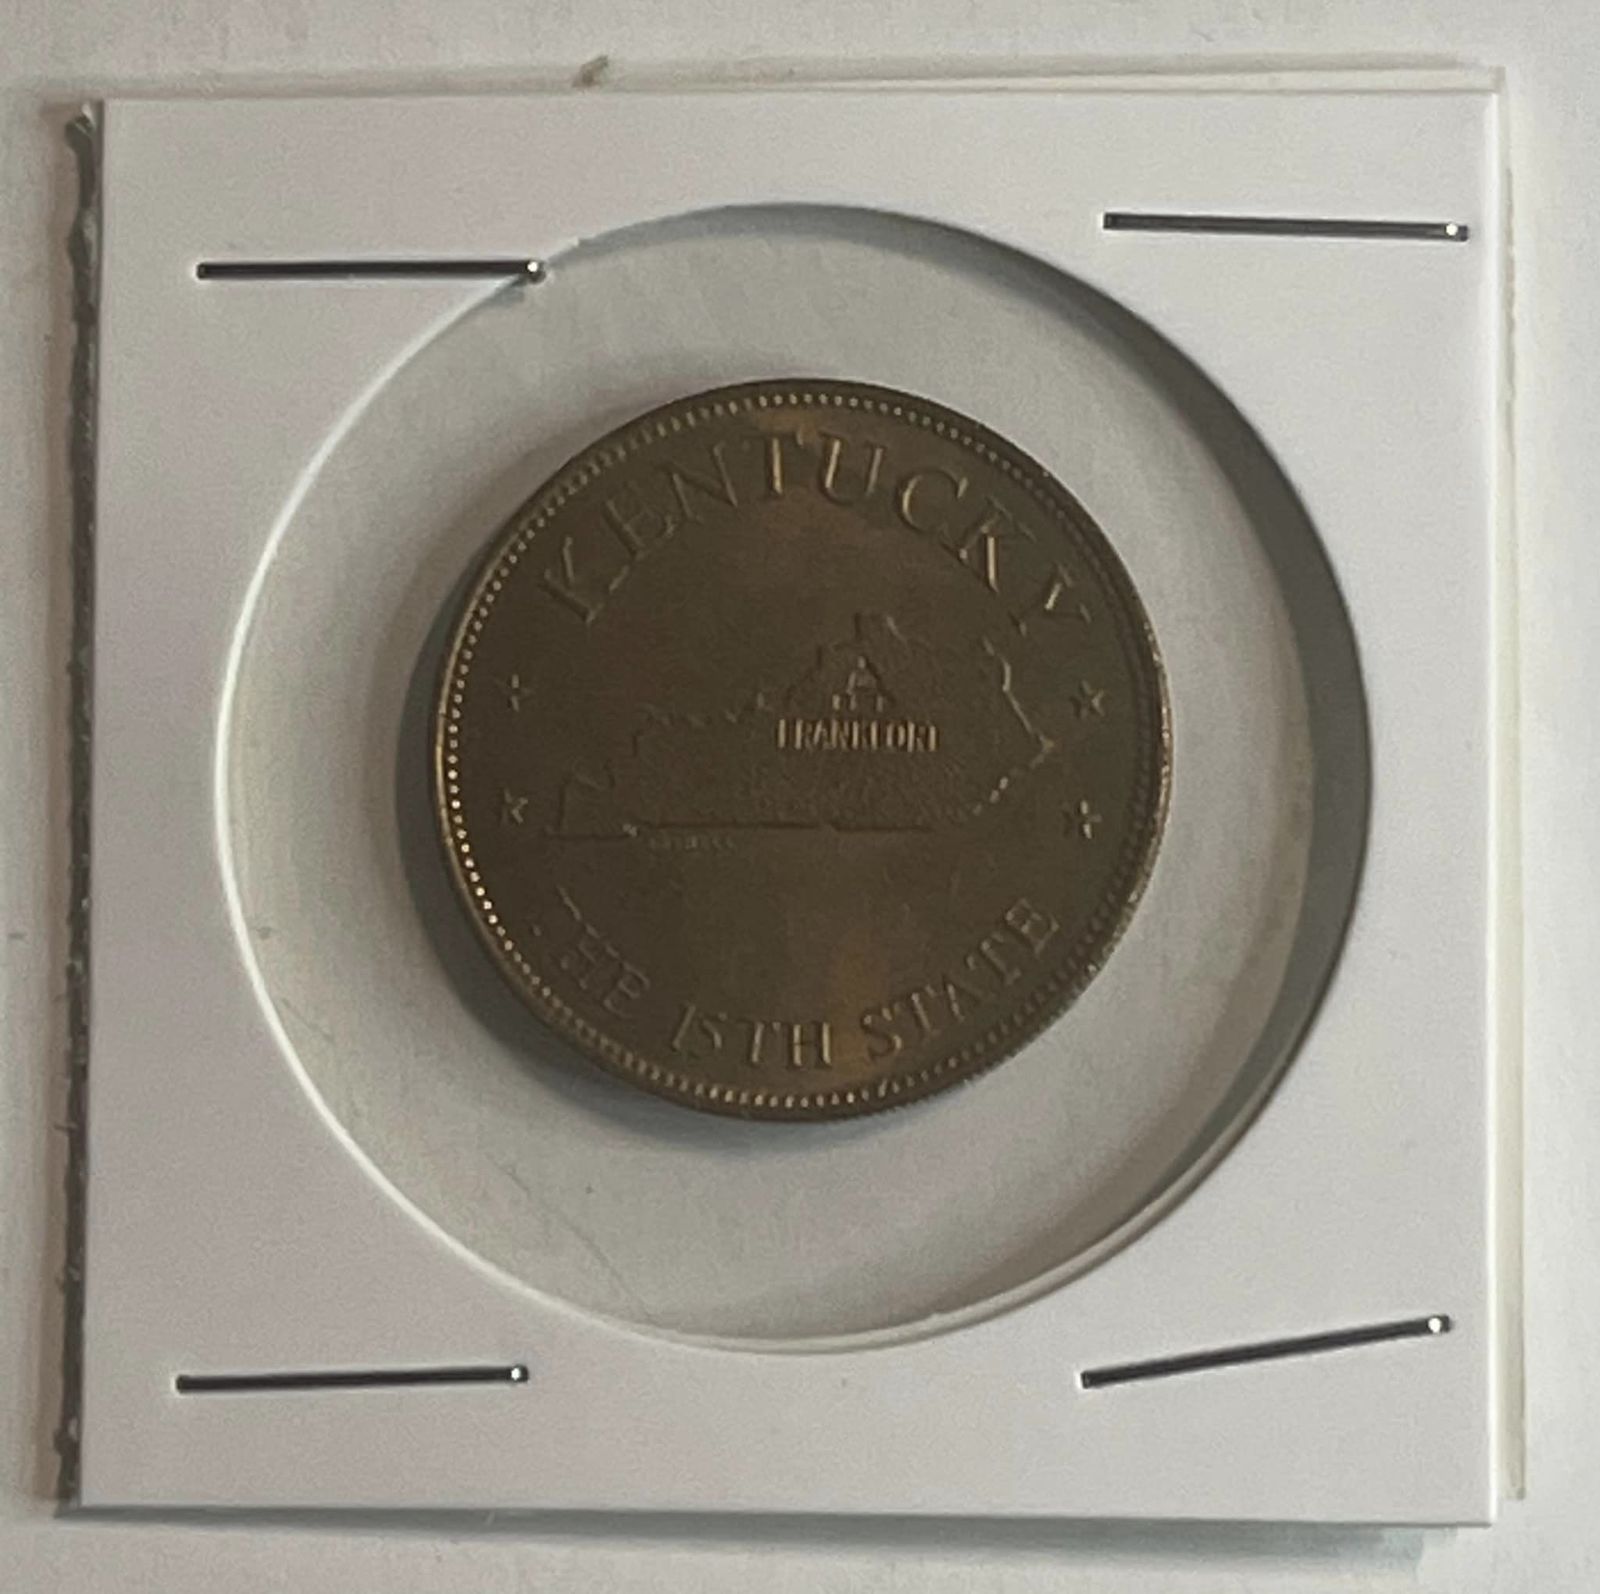 Primary image for (1969) SHELL'S STATE OF THE UNION GAME TOKEN - KENTUCKY (THE 15TH STATE)